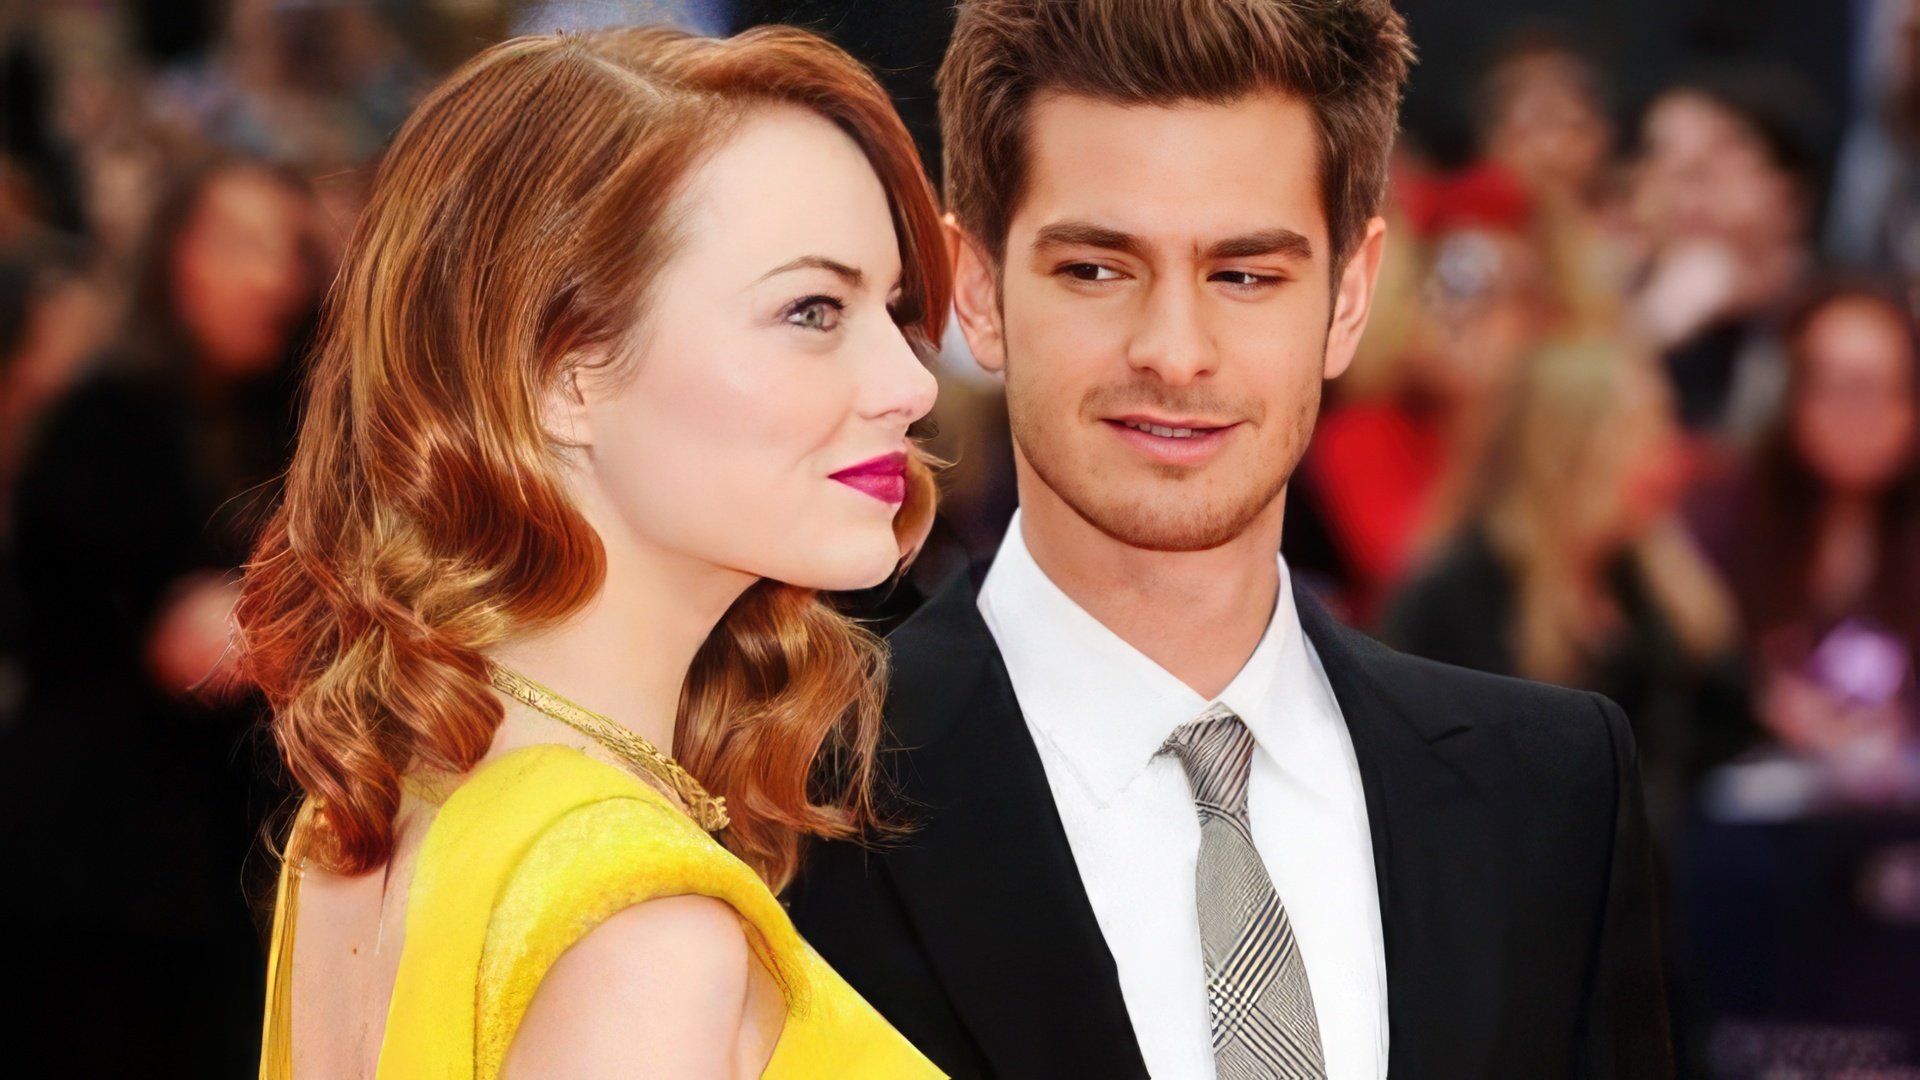 Andrew Garfield and Emma Stone at “The Amazing Spider-Man” premiere”